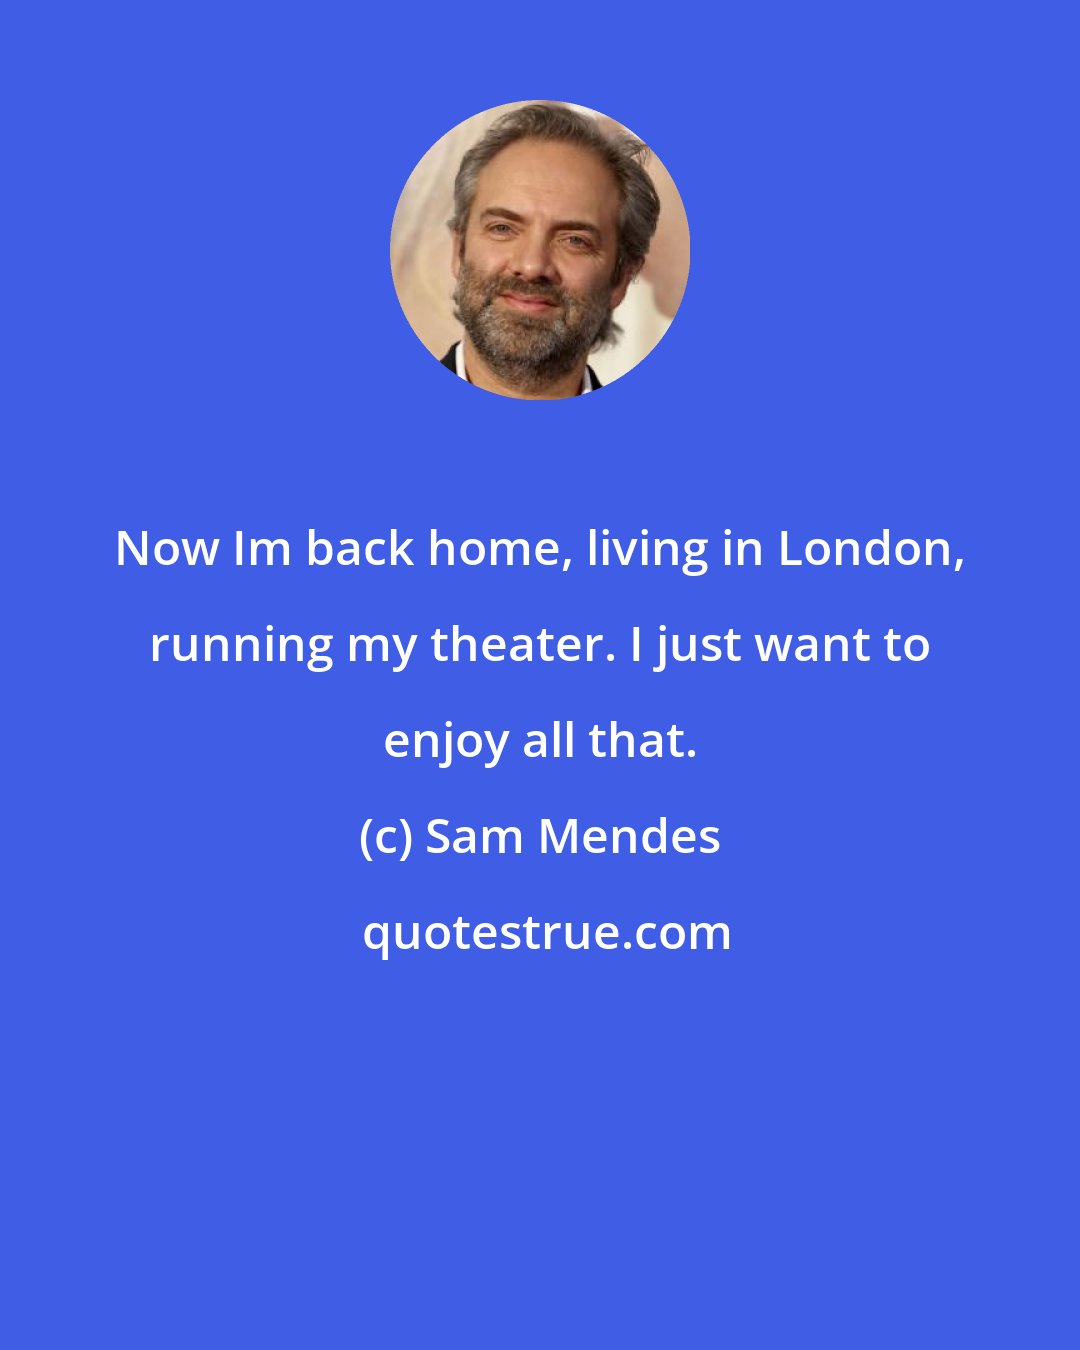 Sam Mendes: Now Im back home, living in London, running my theater. I just want to enjoy all that.